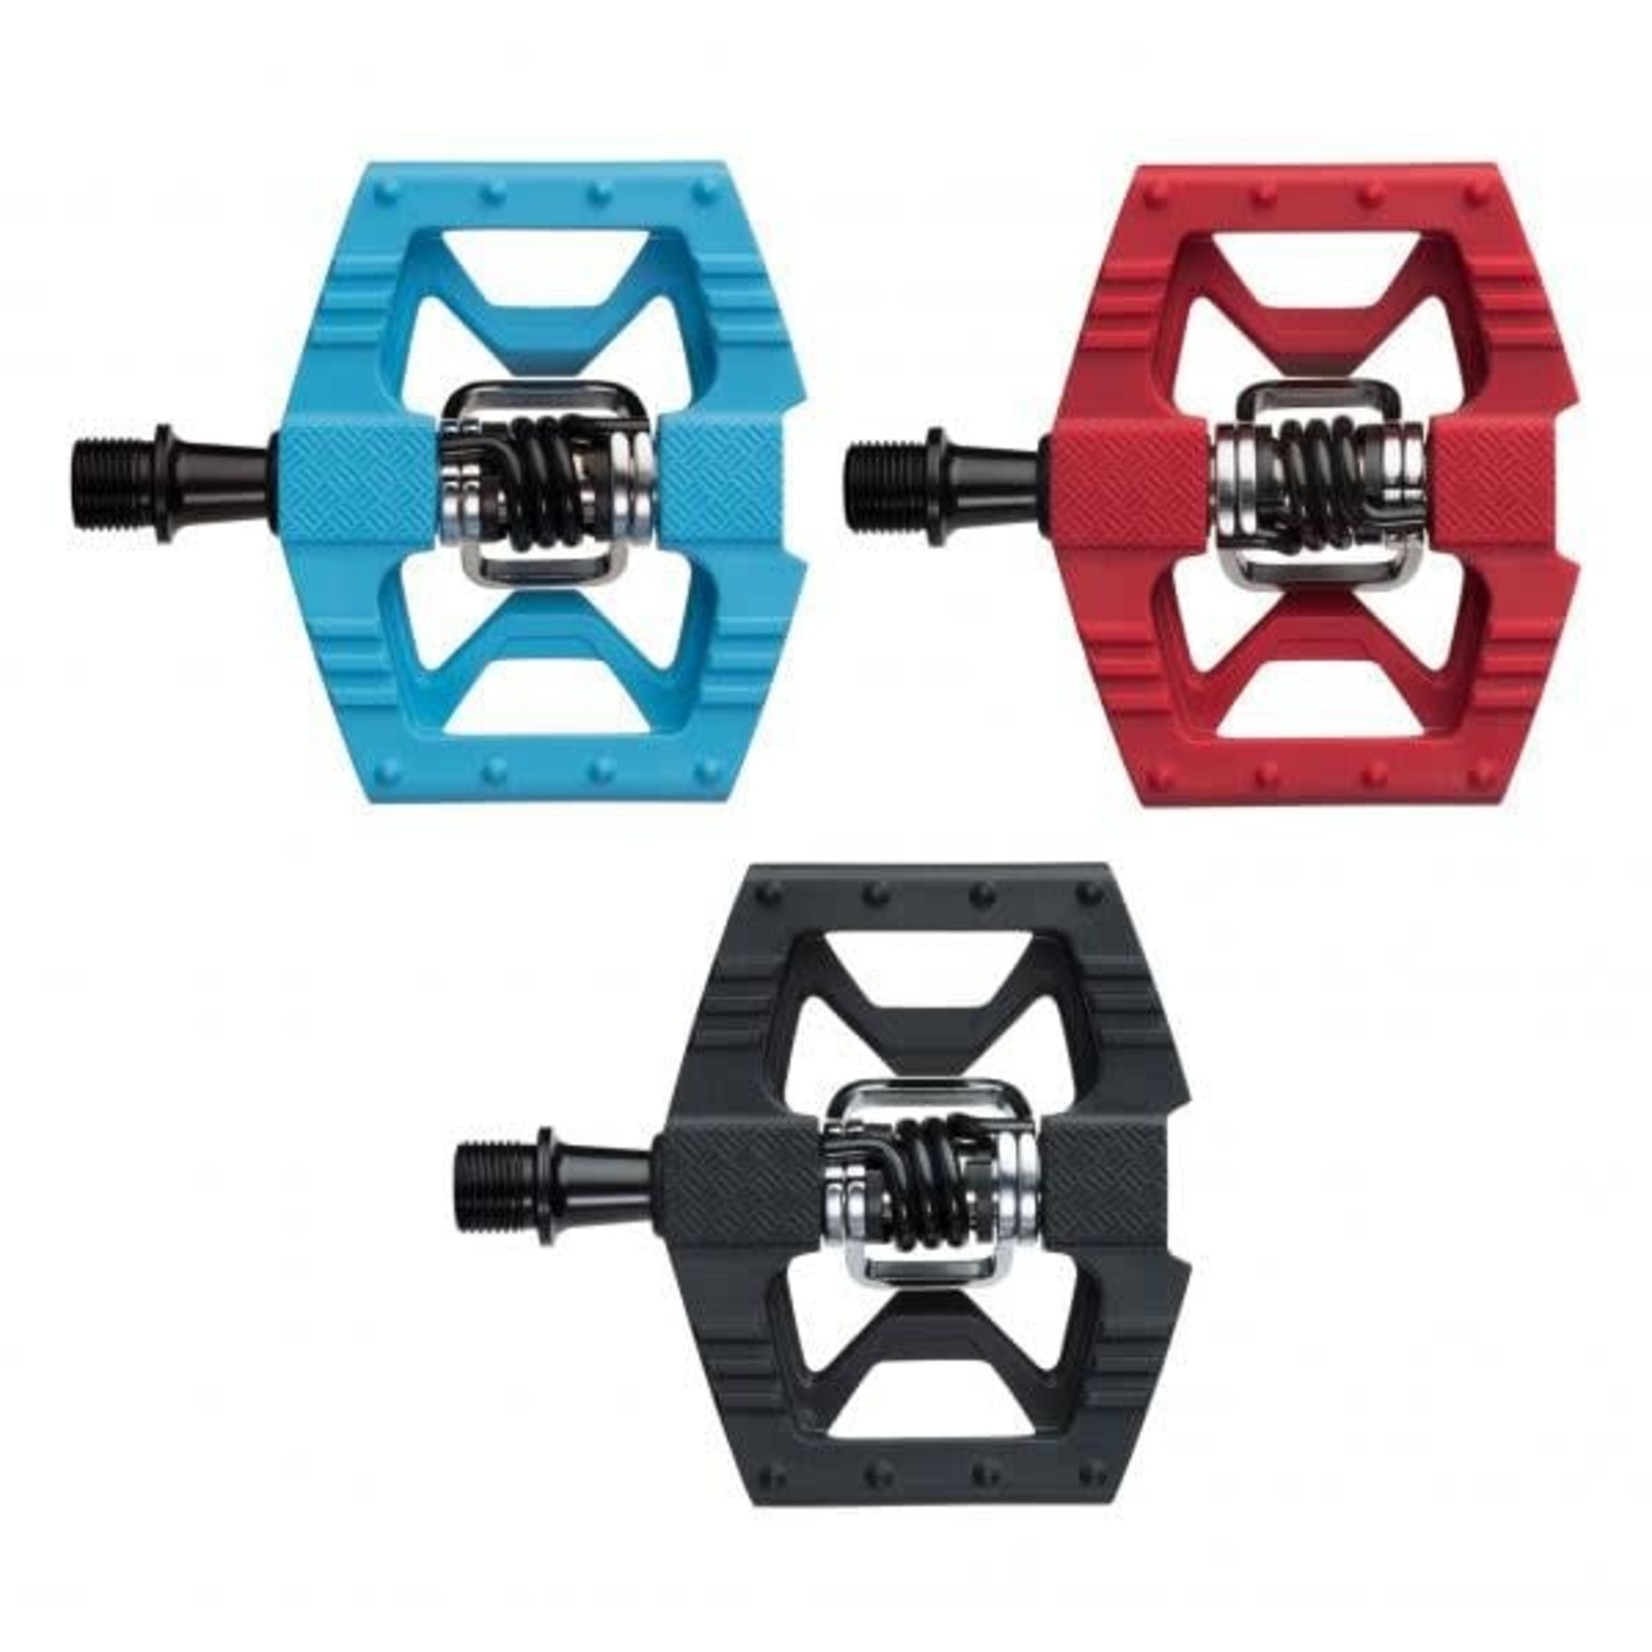 Crankbrothers Crankbrothers Doubleshot 1 Pedal